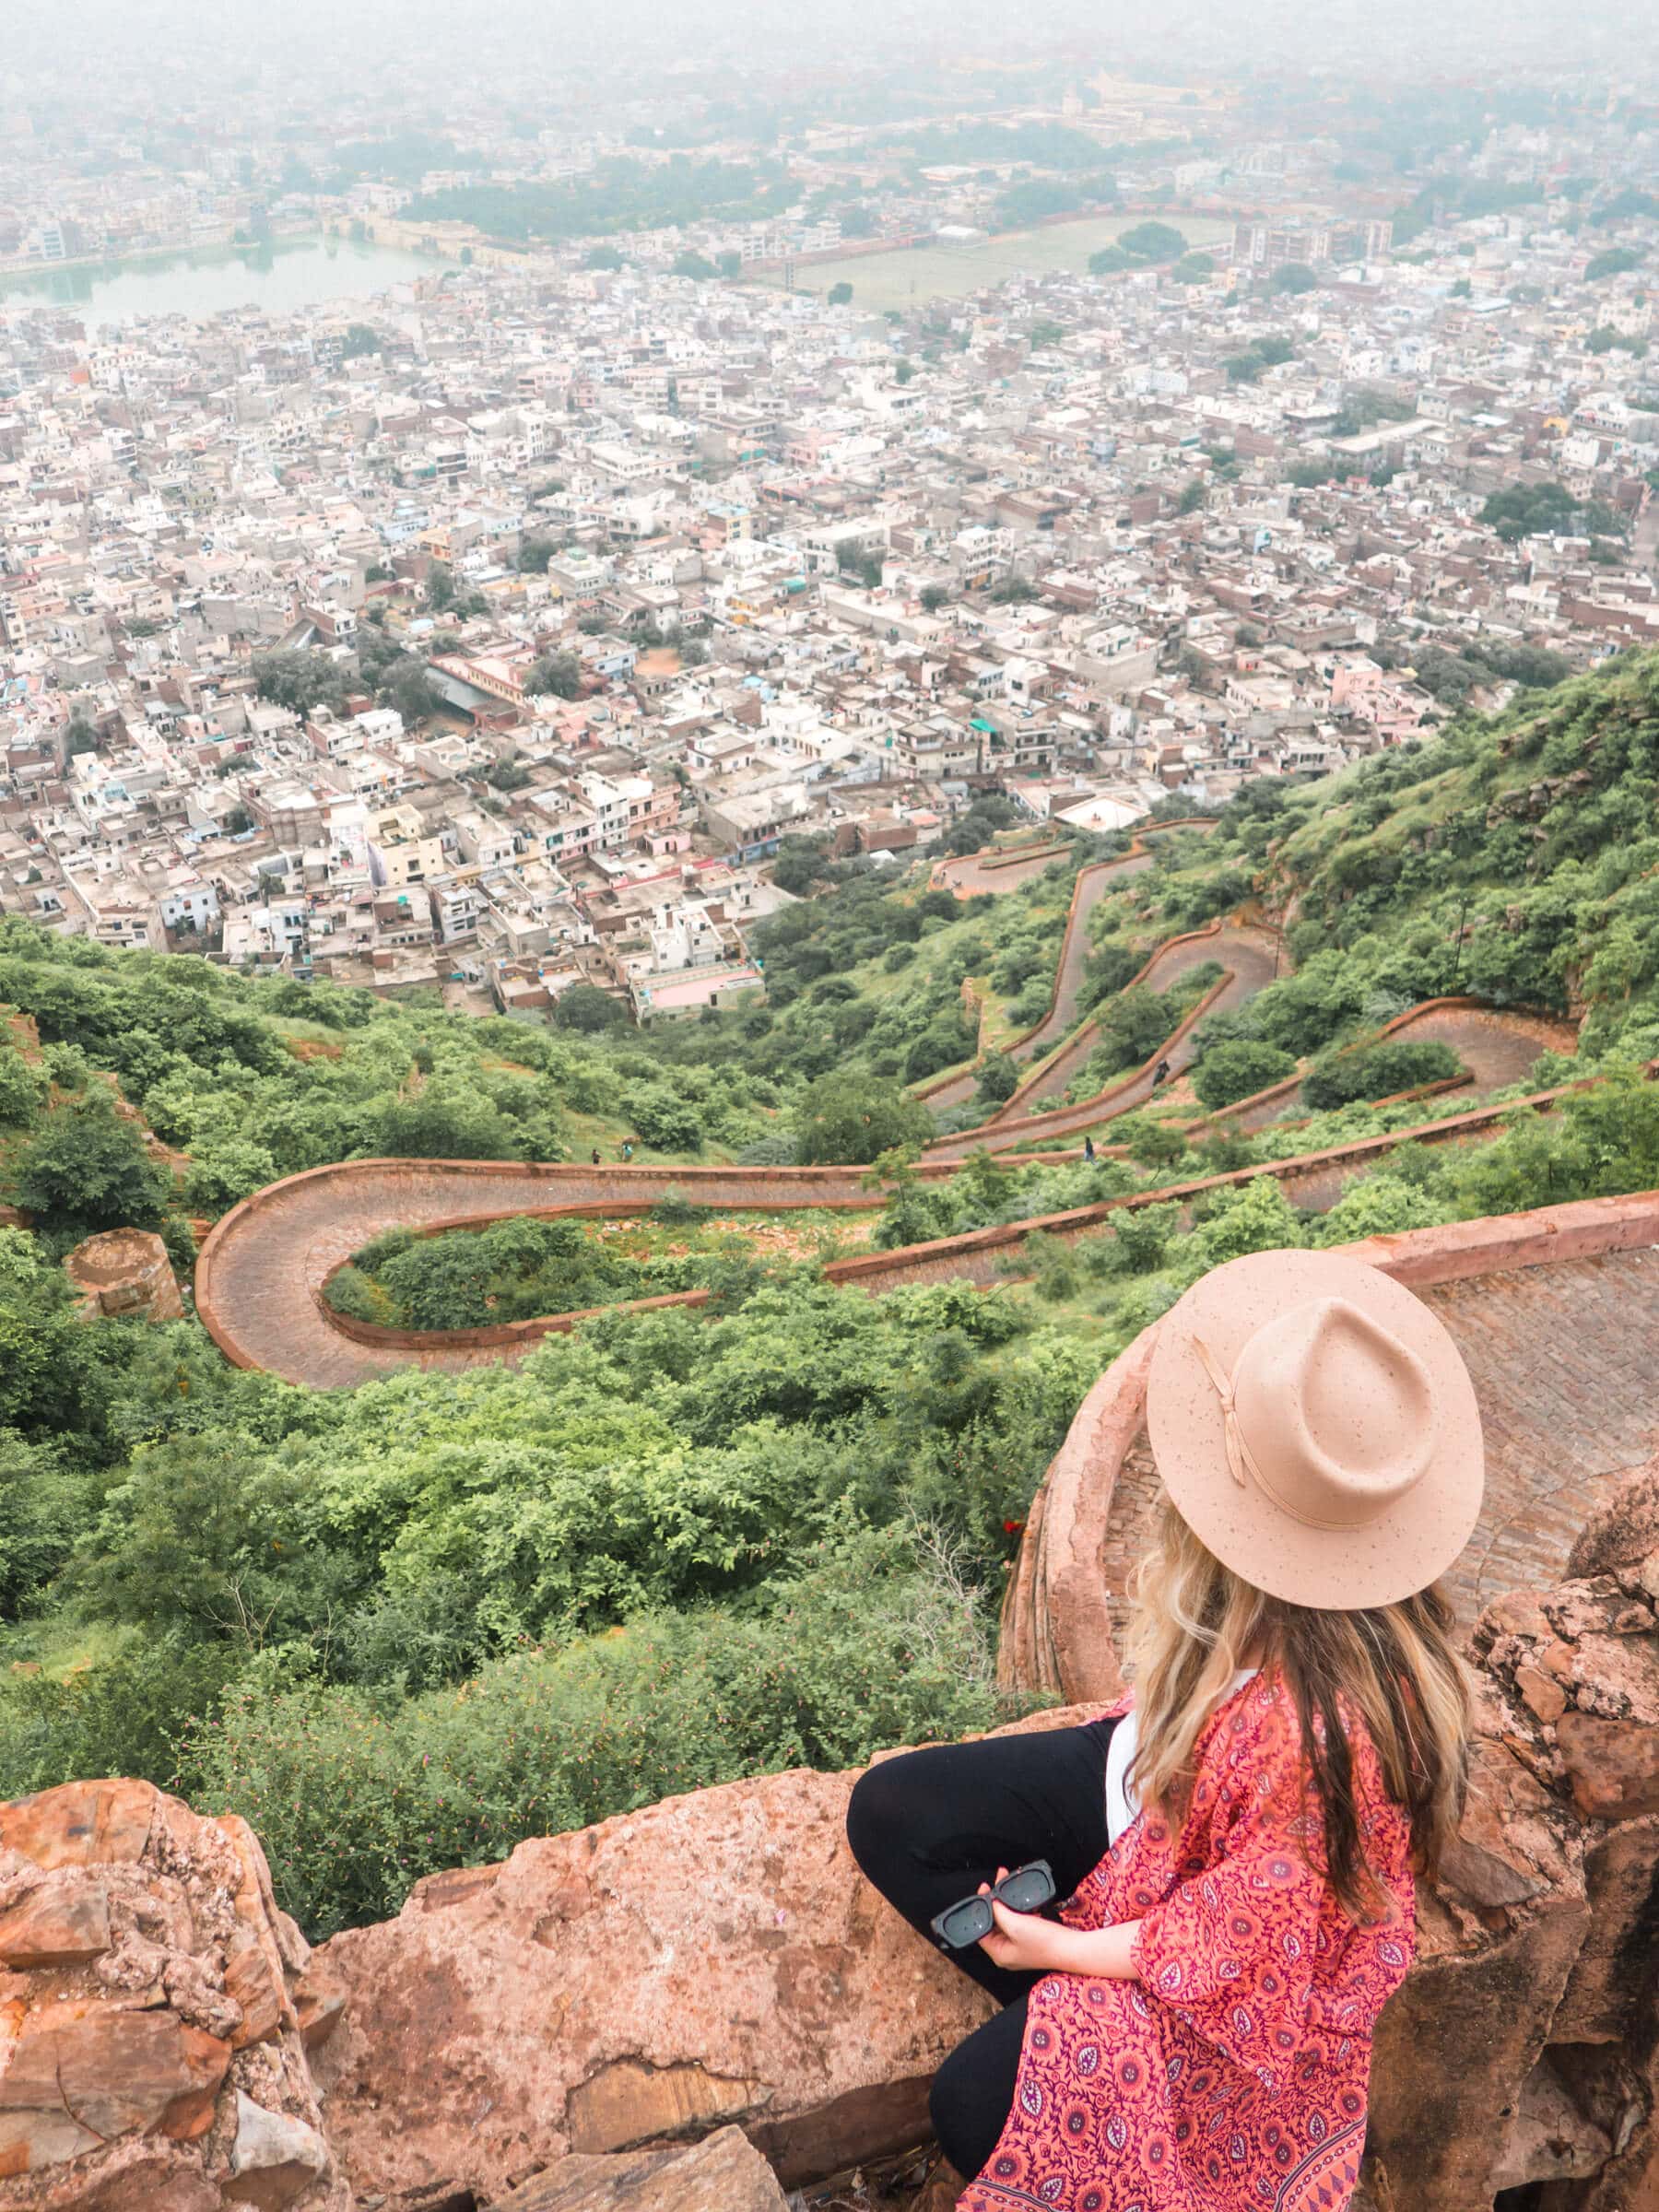 A guide to Nahargarh Fort - The best sunset view point in Jaipur, India. How to get the best sunset photos at Nahargarh Fort.